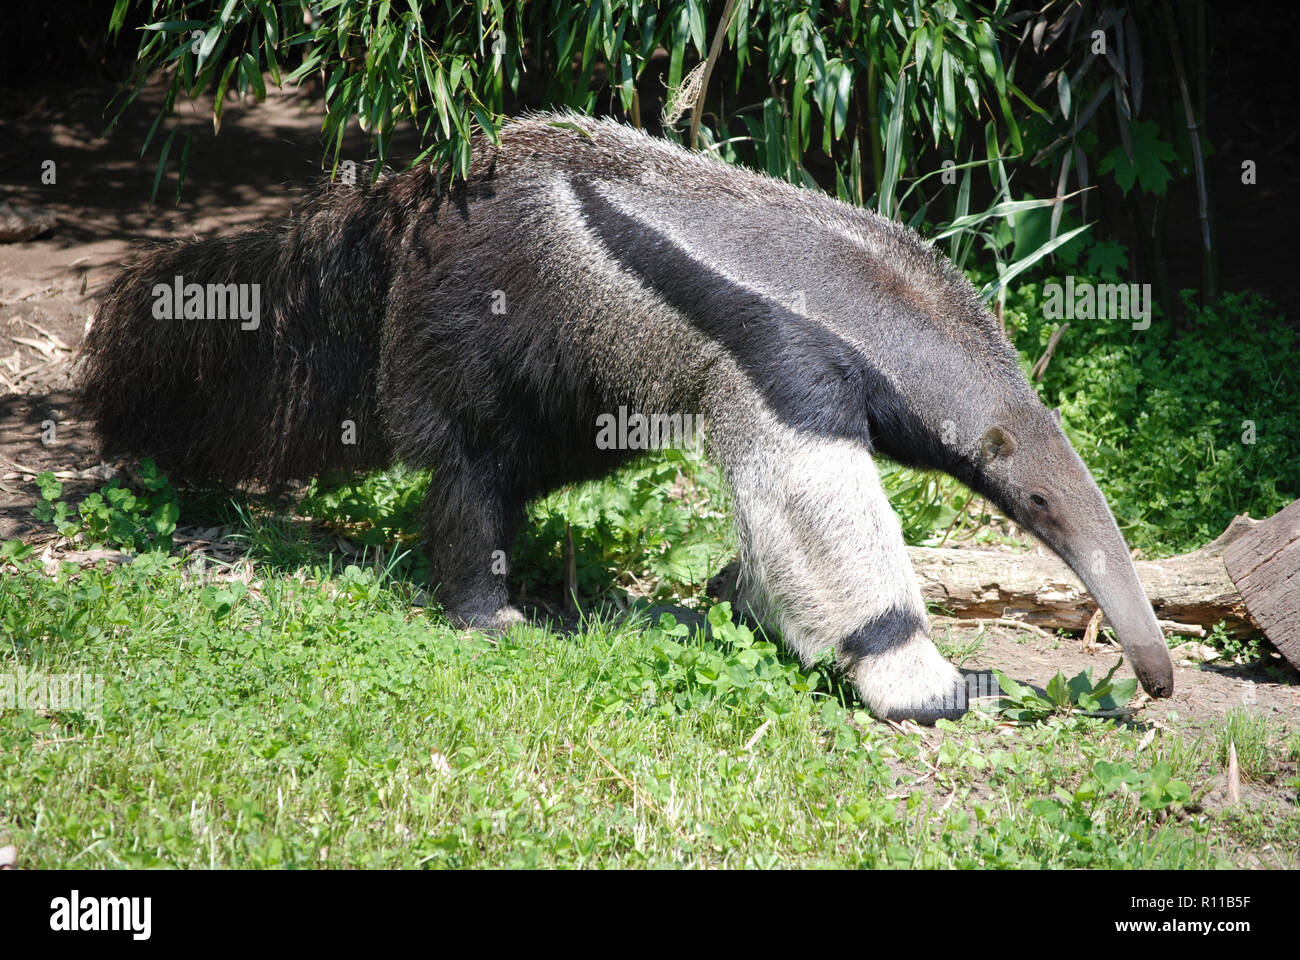 Anteater nosing around for some ants. Stock Photo